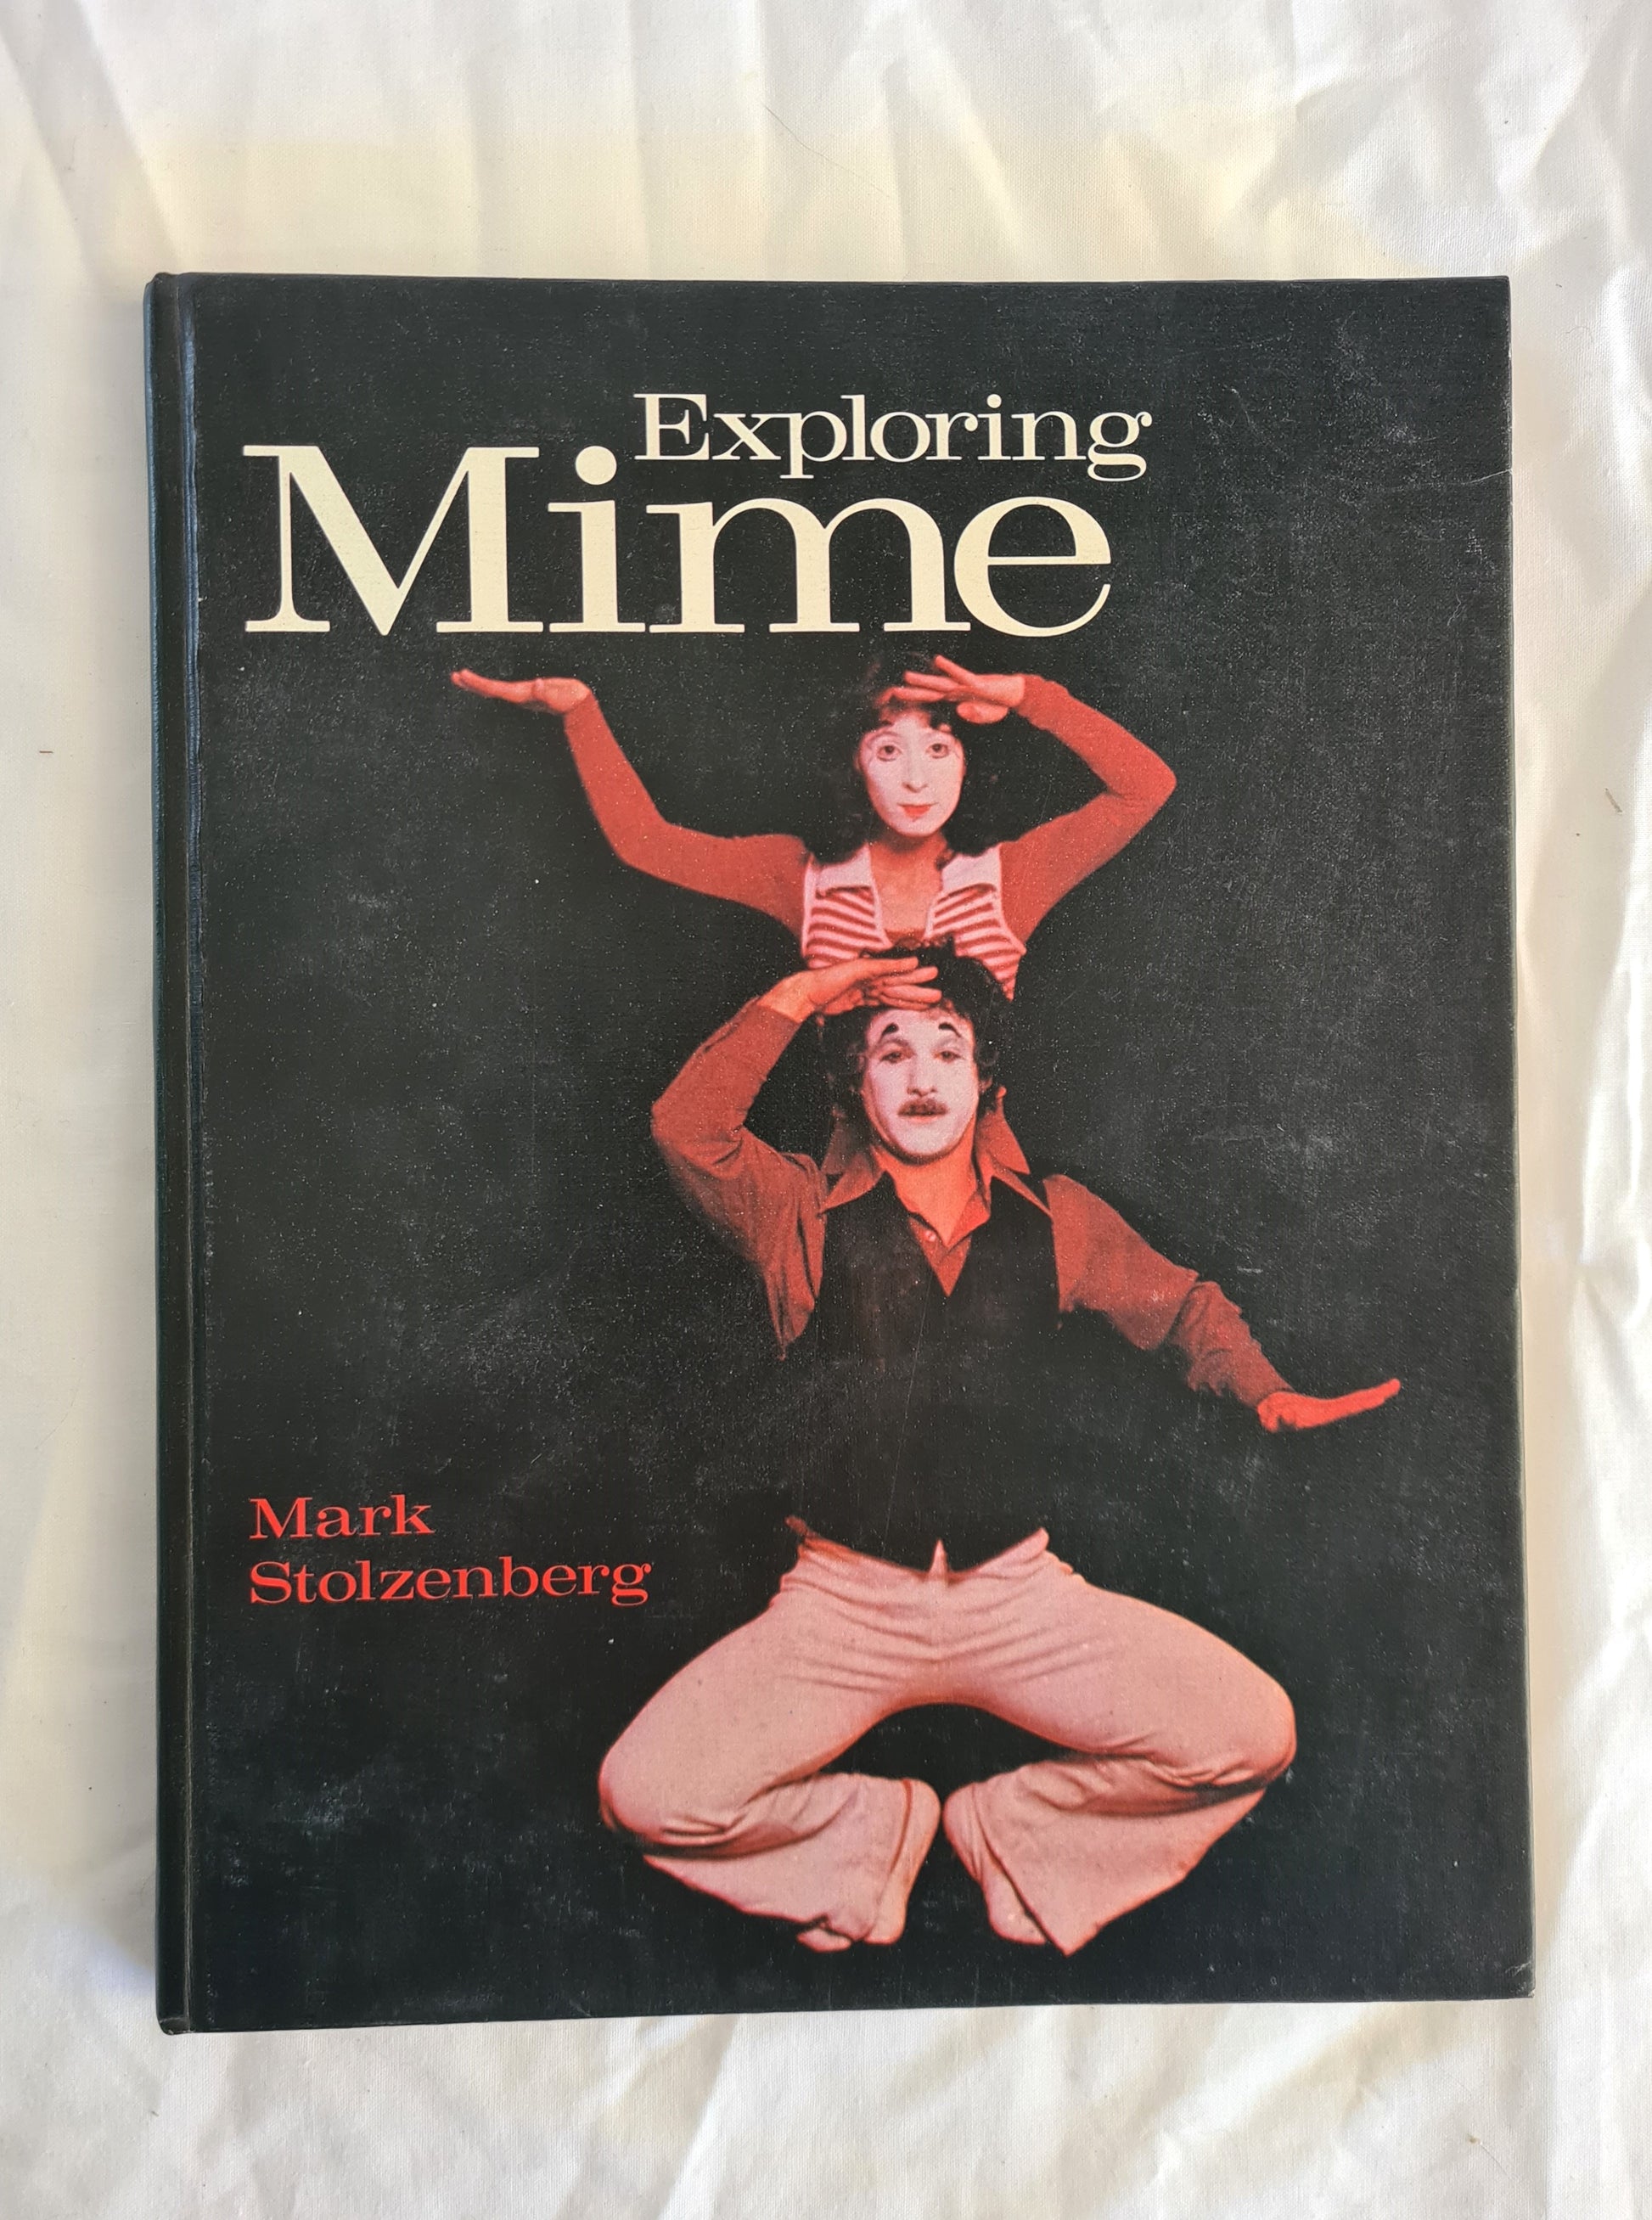 Exploring Mime  by Mark Stolzenberg  Photographs by Jim Moore